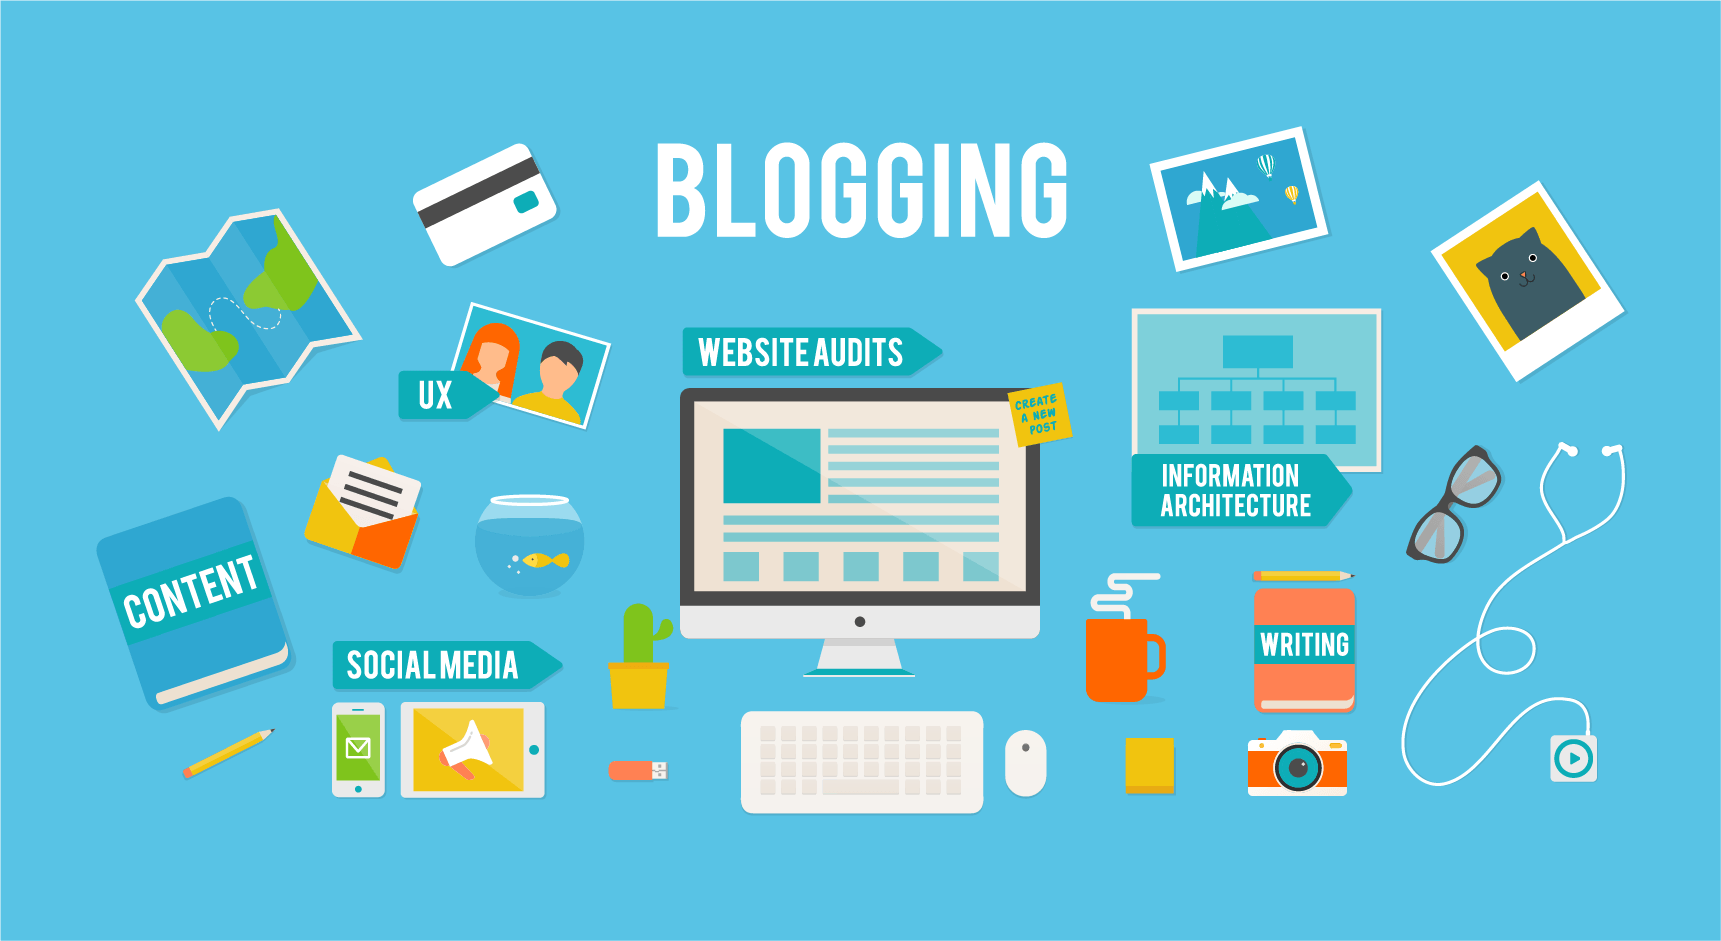 Why Blogging so Important for Digital Marketing